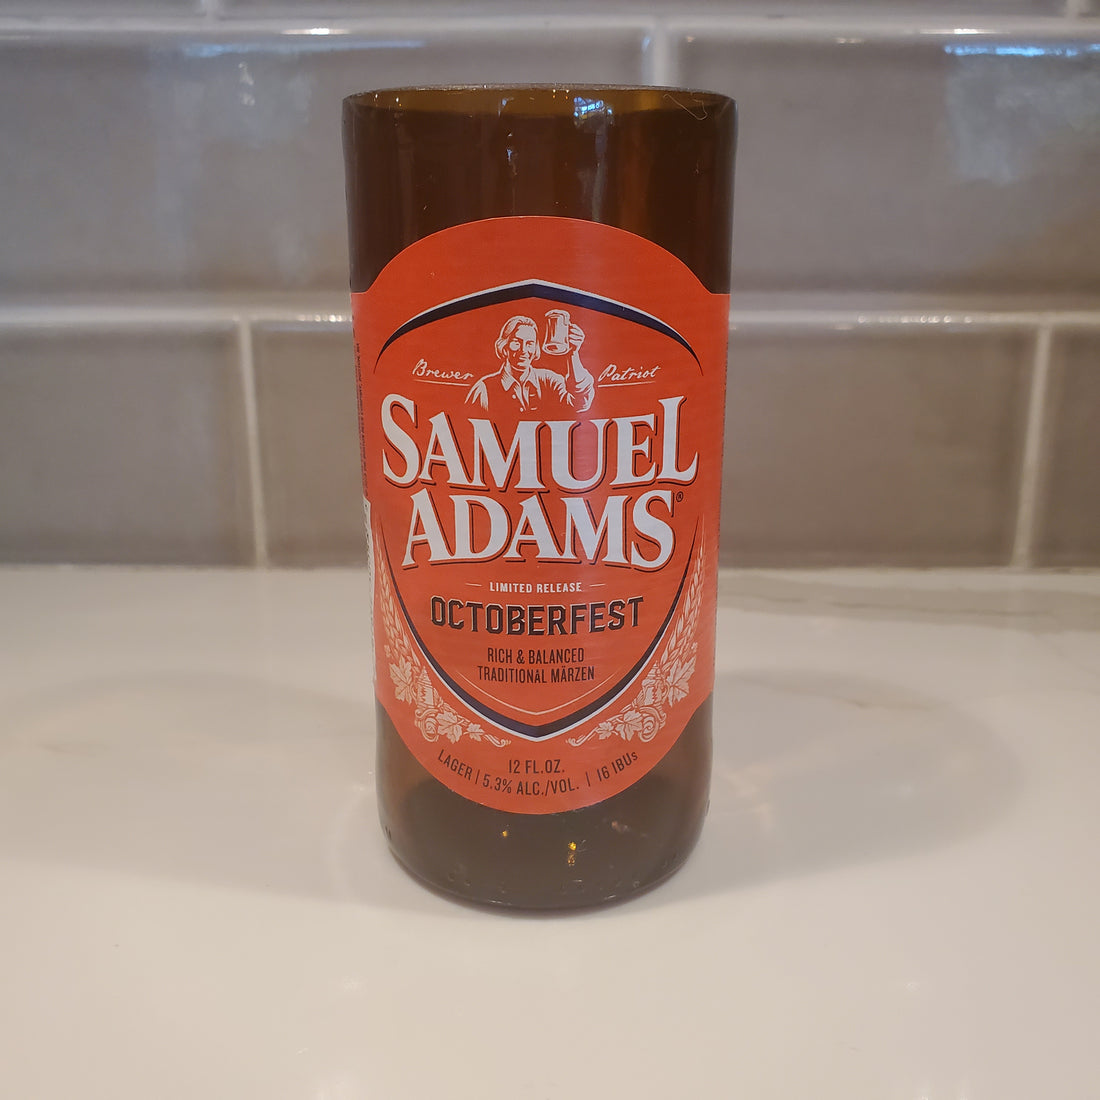 Samuel Adams Octoberfest Hand Cut Upcycled Beer Bottle Candle - Choose Your Scent